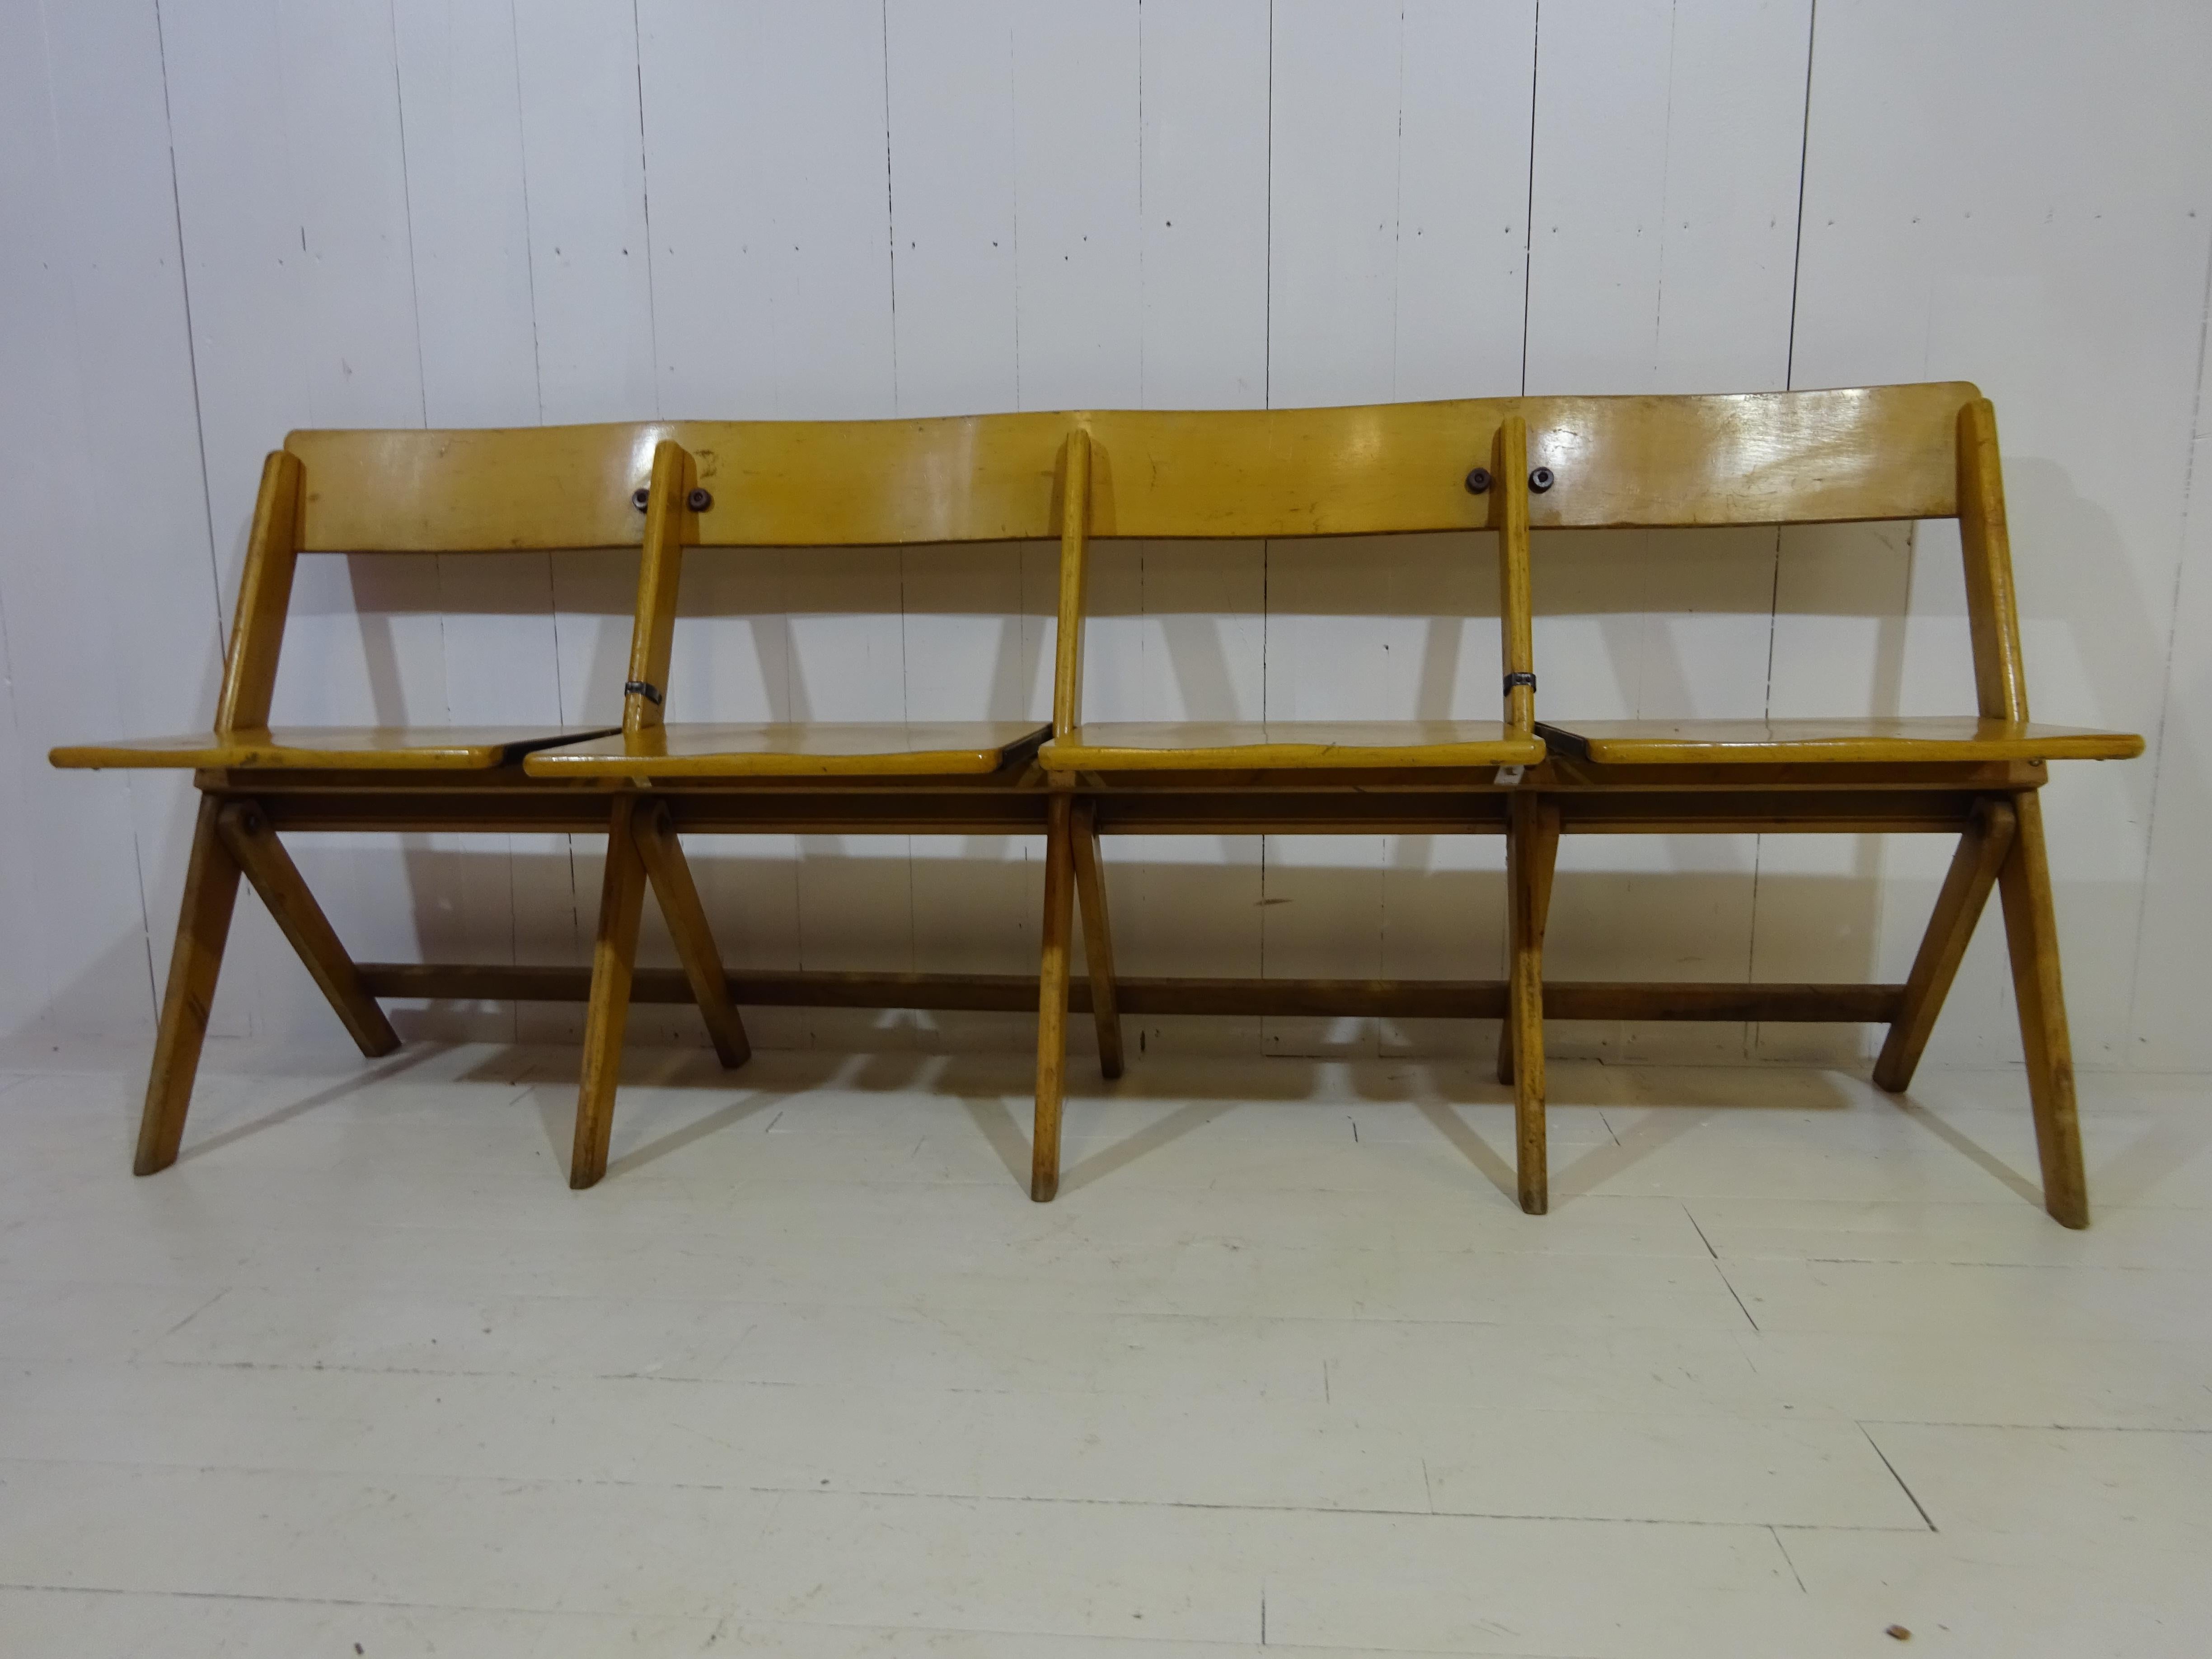 1950's Vintage folding chair row in beech

History

Folding chairs have been in use for thousands of years in many cultures, including ancient Egypt and Rome. They were even commonly used in churches as liturgical furniture in the Middle